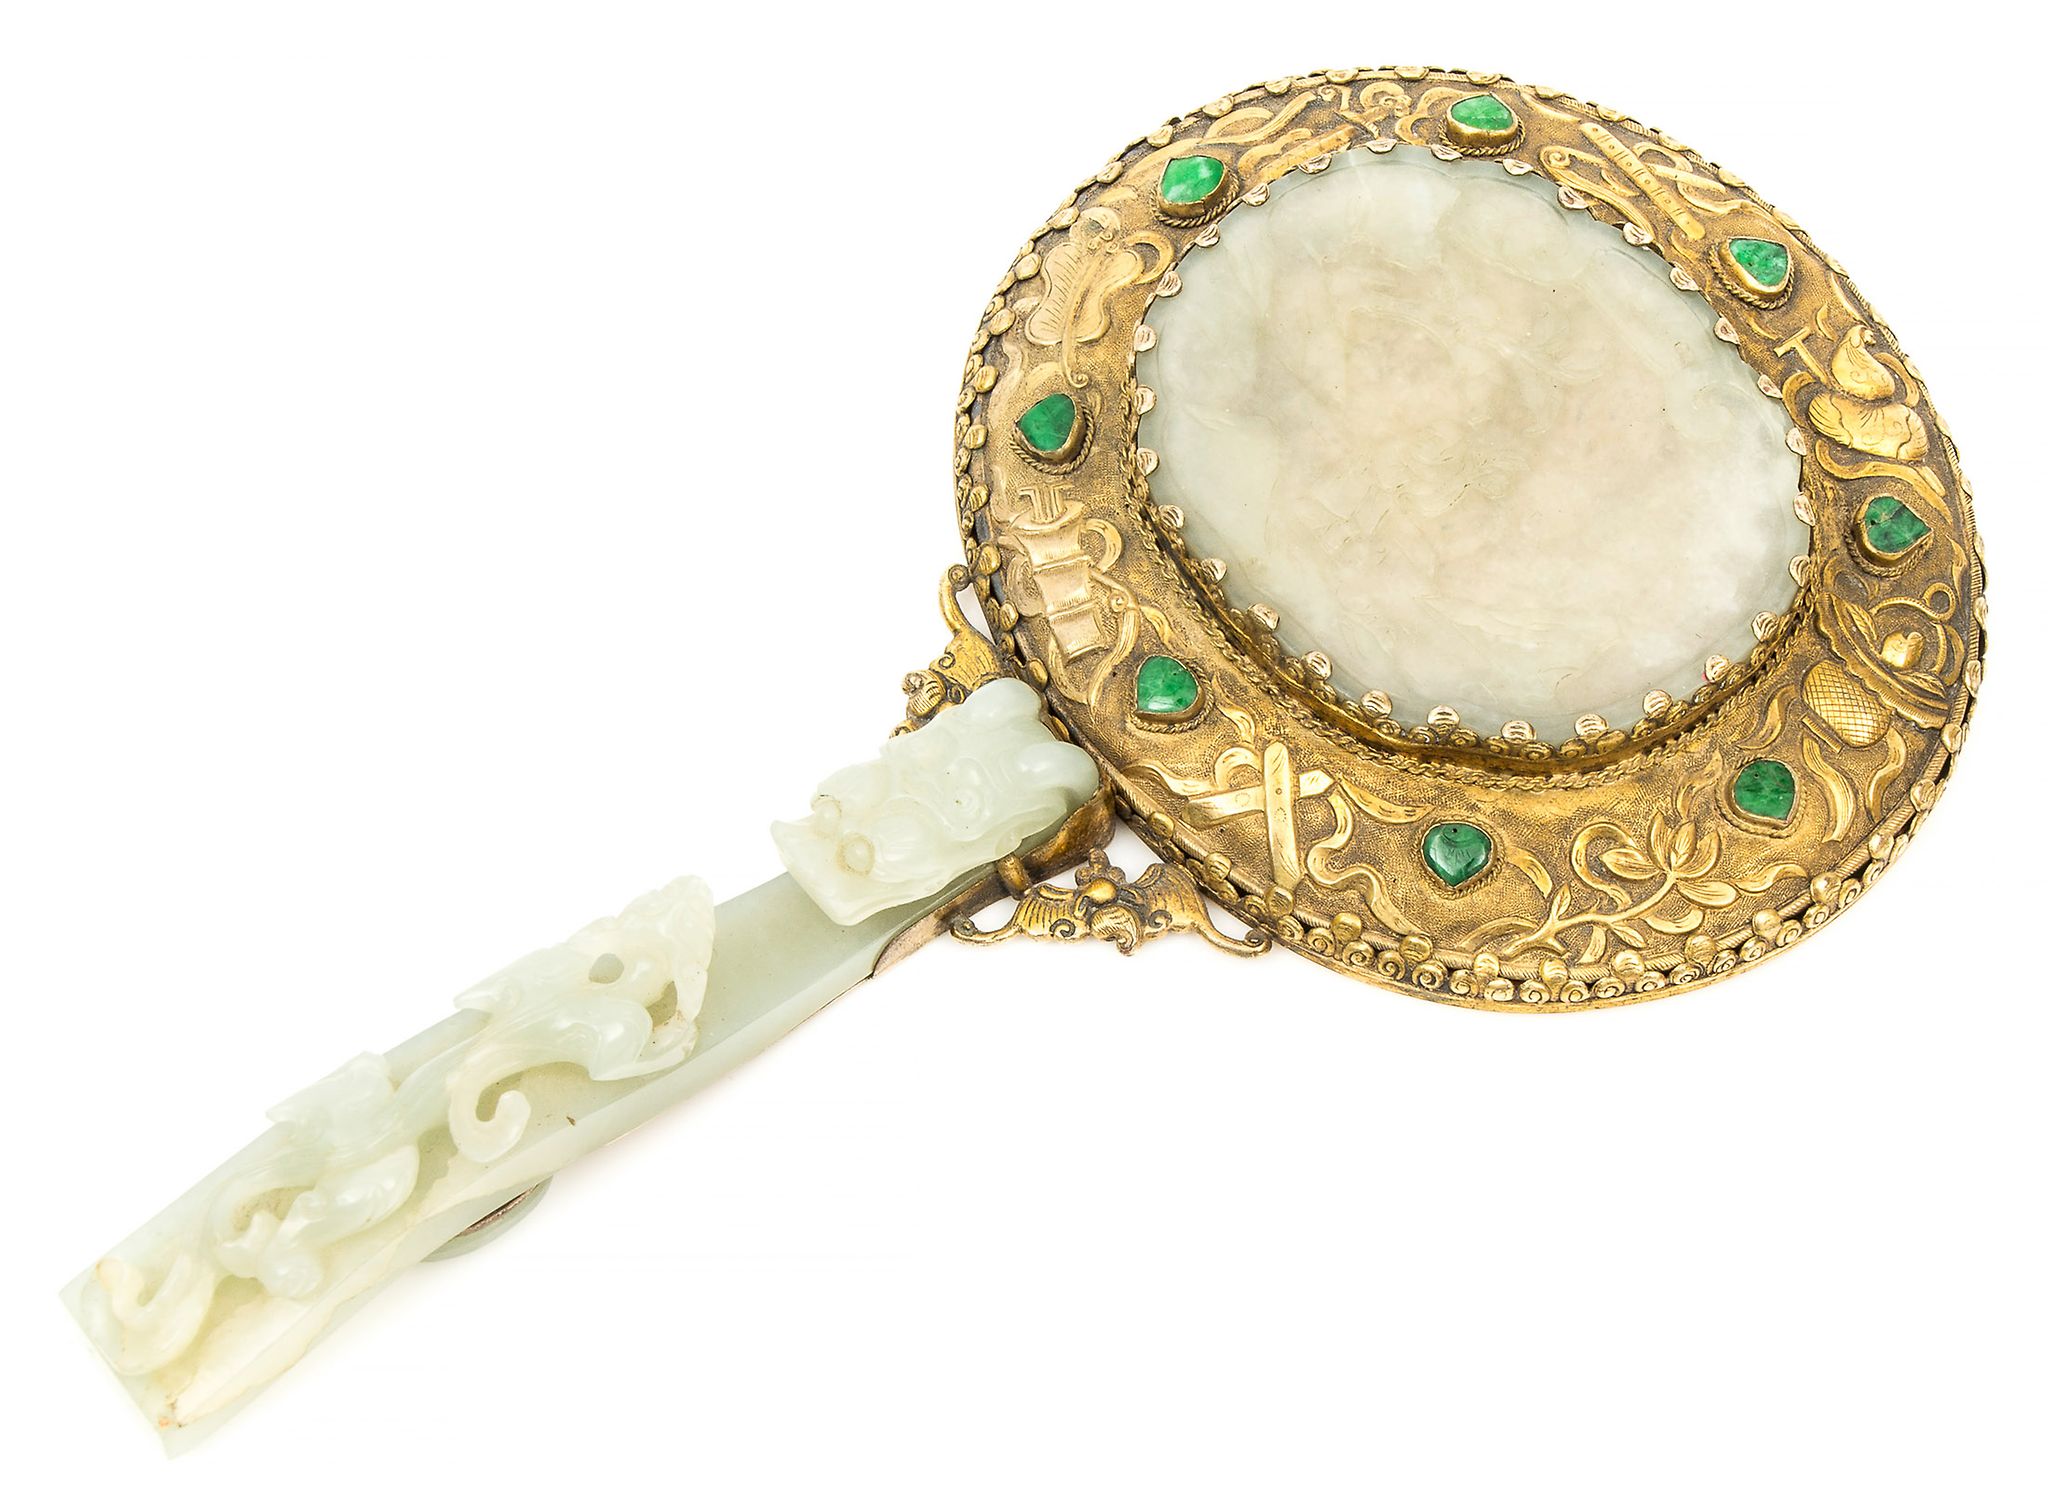 A gilded metal mounted jade mirror, 19th century  , the celadon jade dragon belt- hook forming the - Image 2 of 2